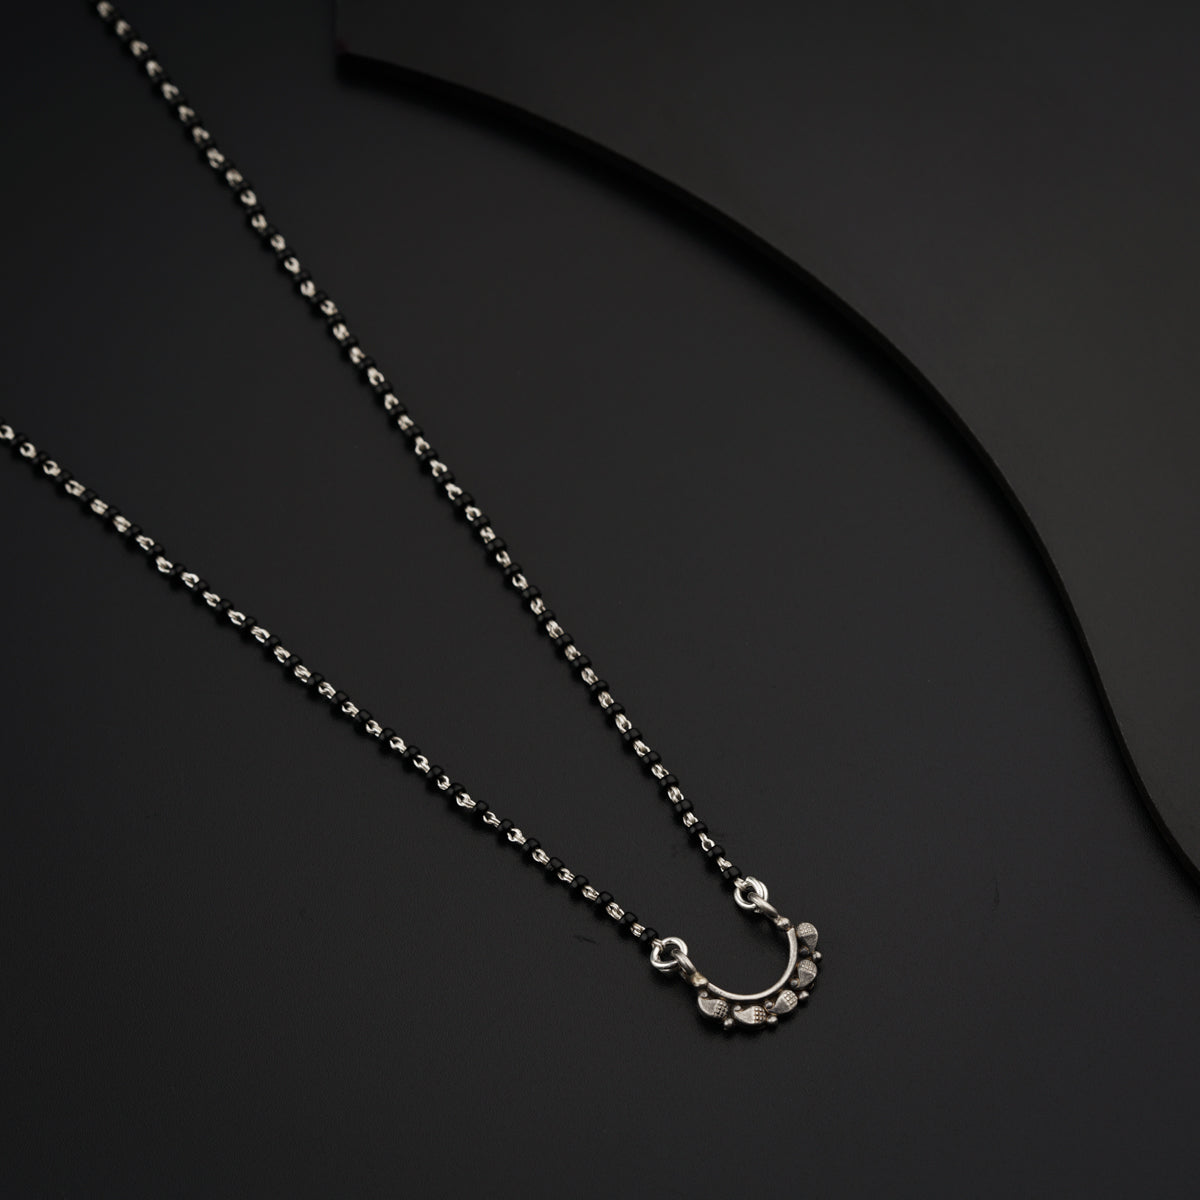 a silver necklace with a circular pendant on a black background